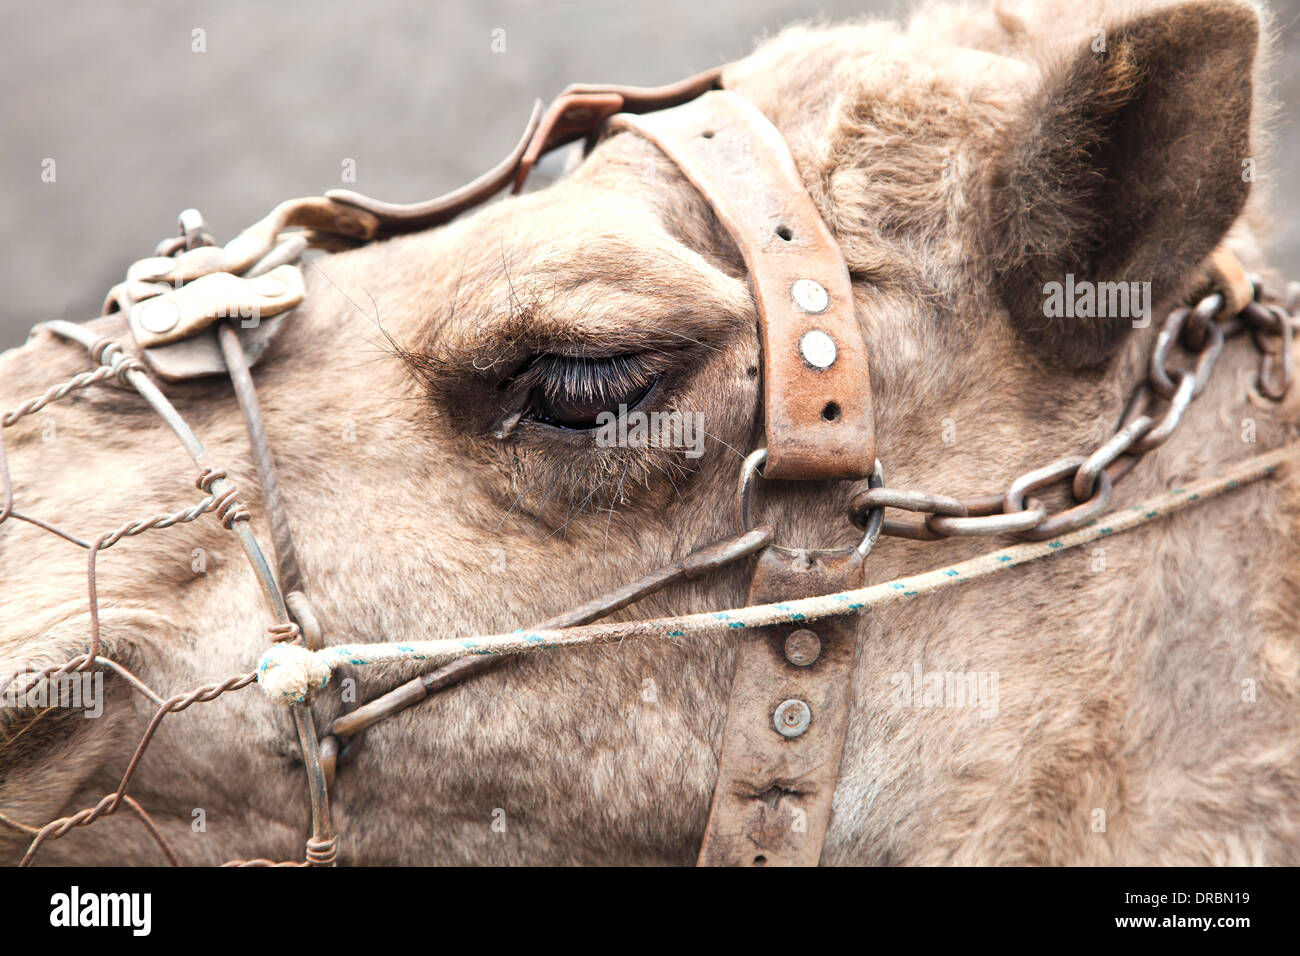 Close-up view of the camel's eye with its big eyelashes. Stock Photo